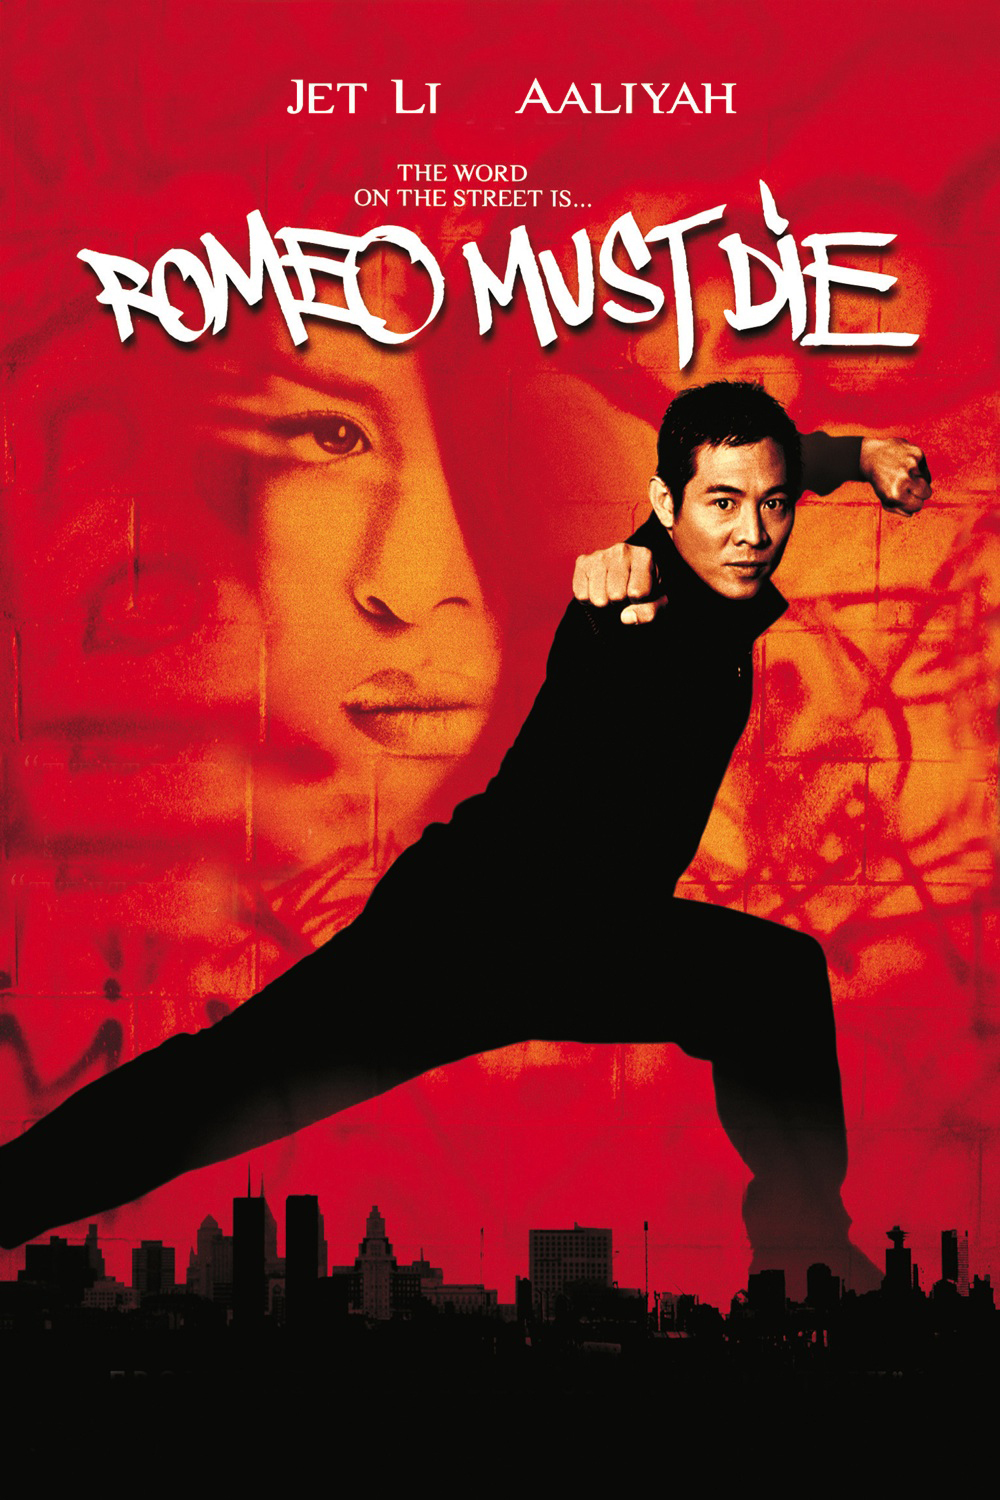 Poster for the movie "Romeo Must Die"